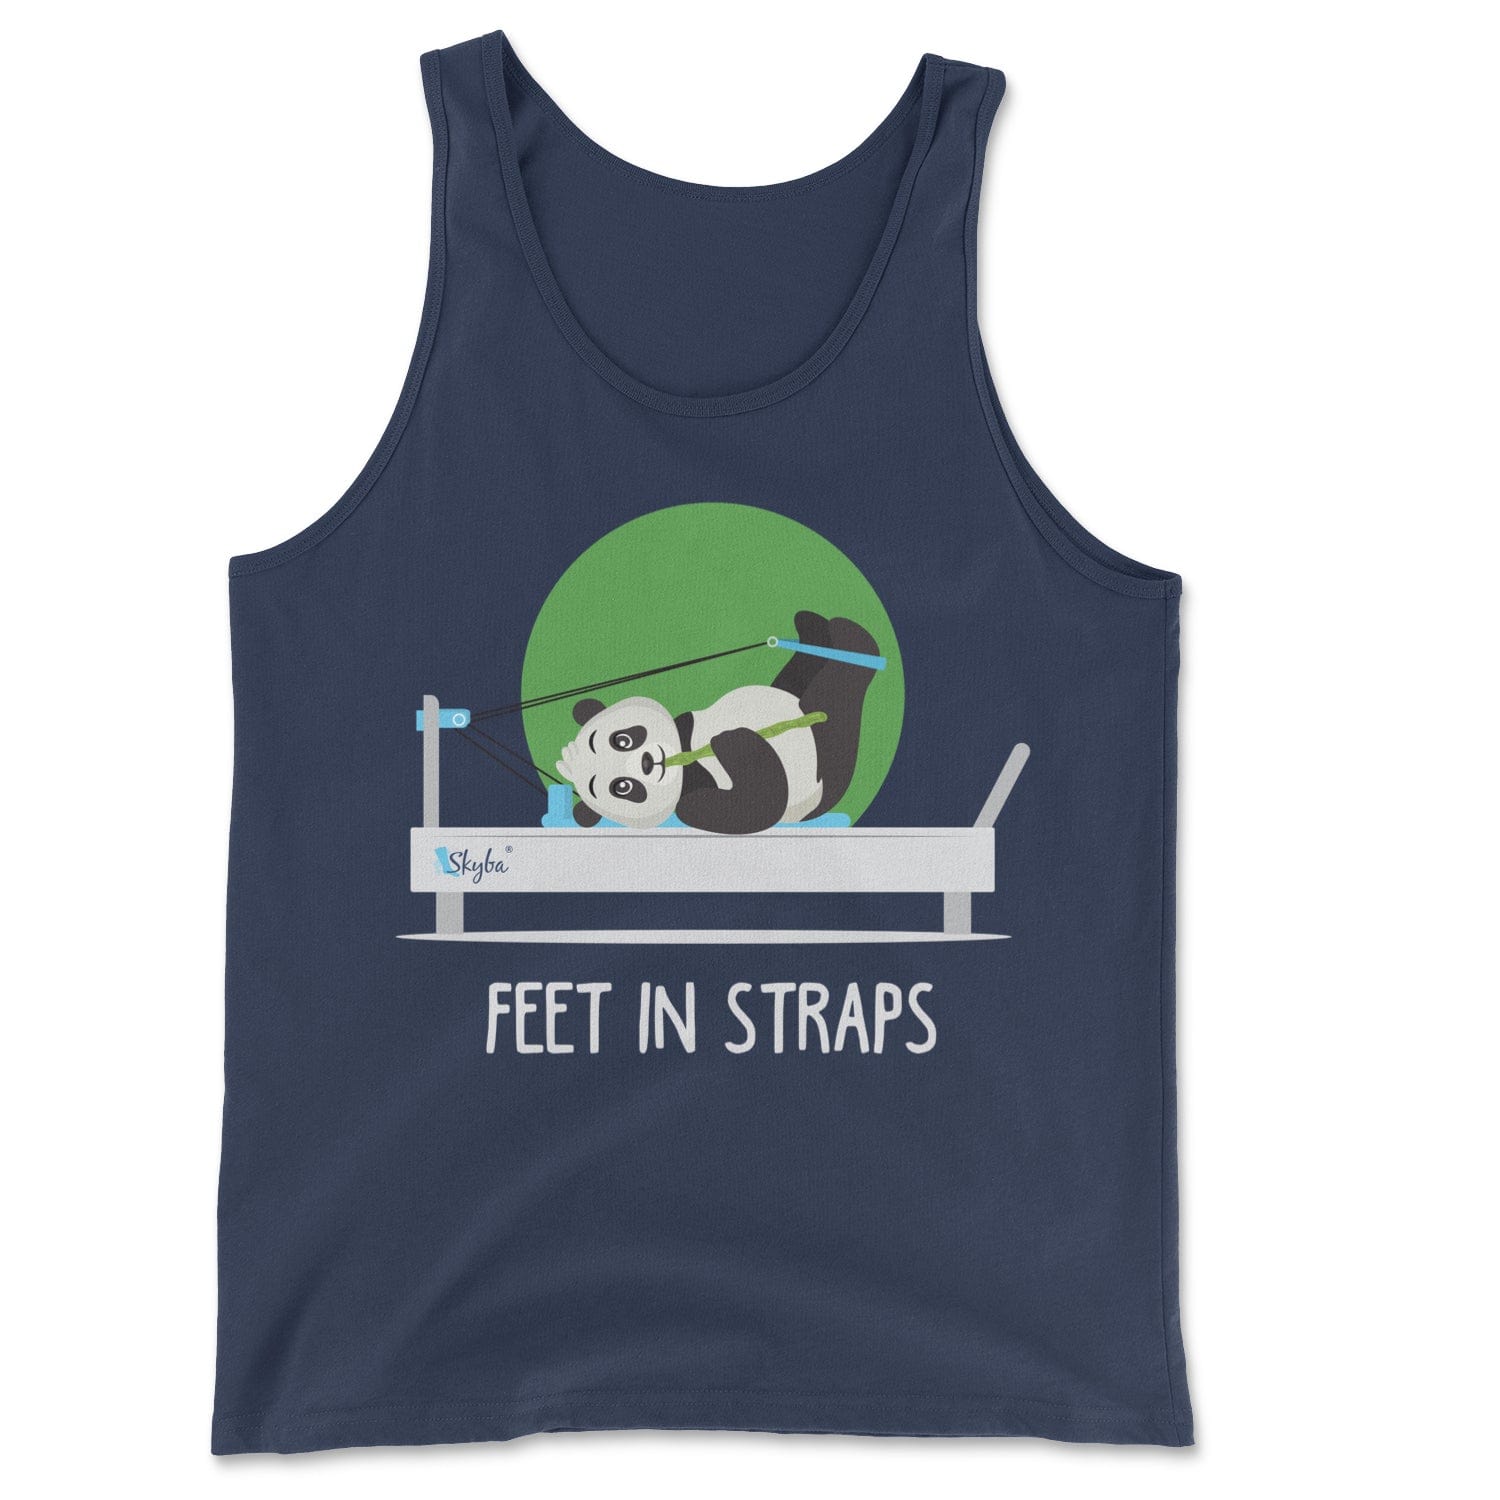 "Feet in Straps" Panda on Reformer - Classic Tank Skyba Print Material